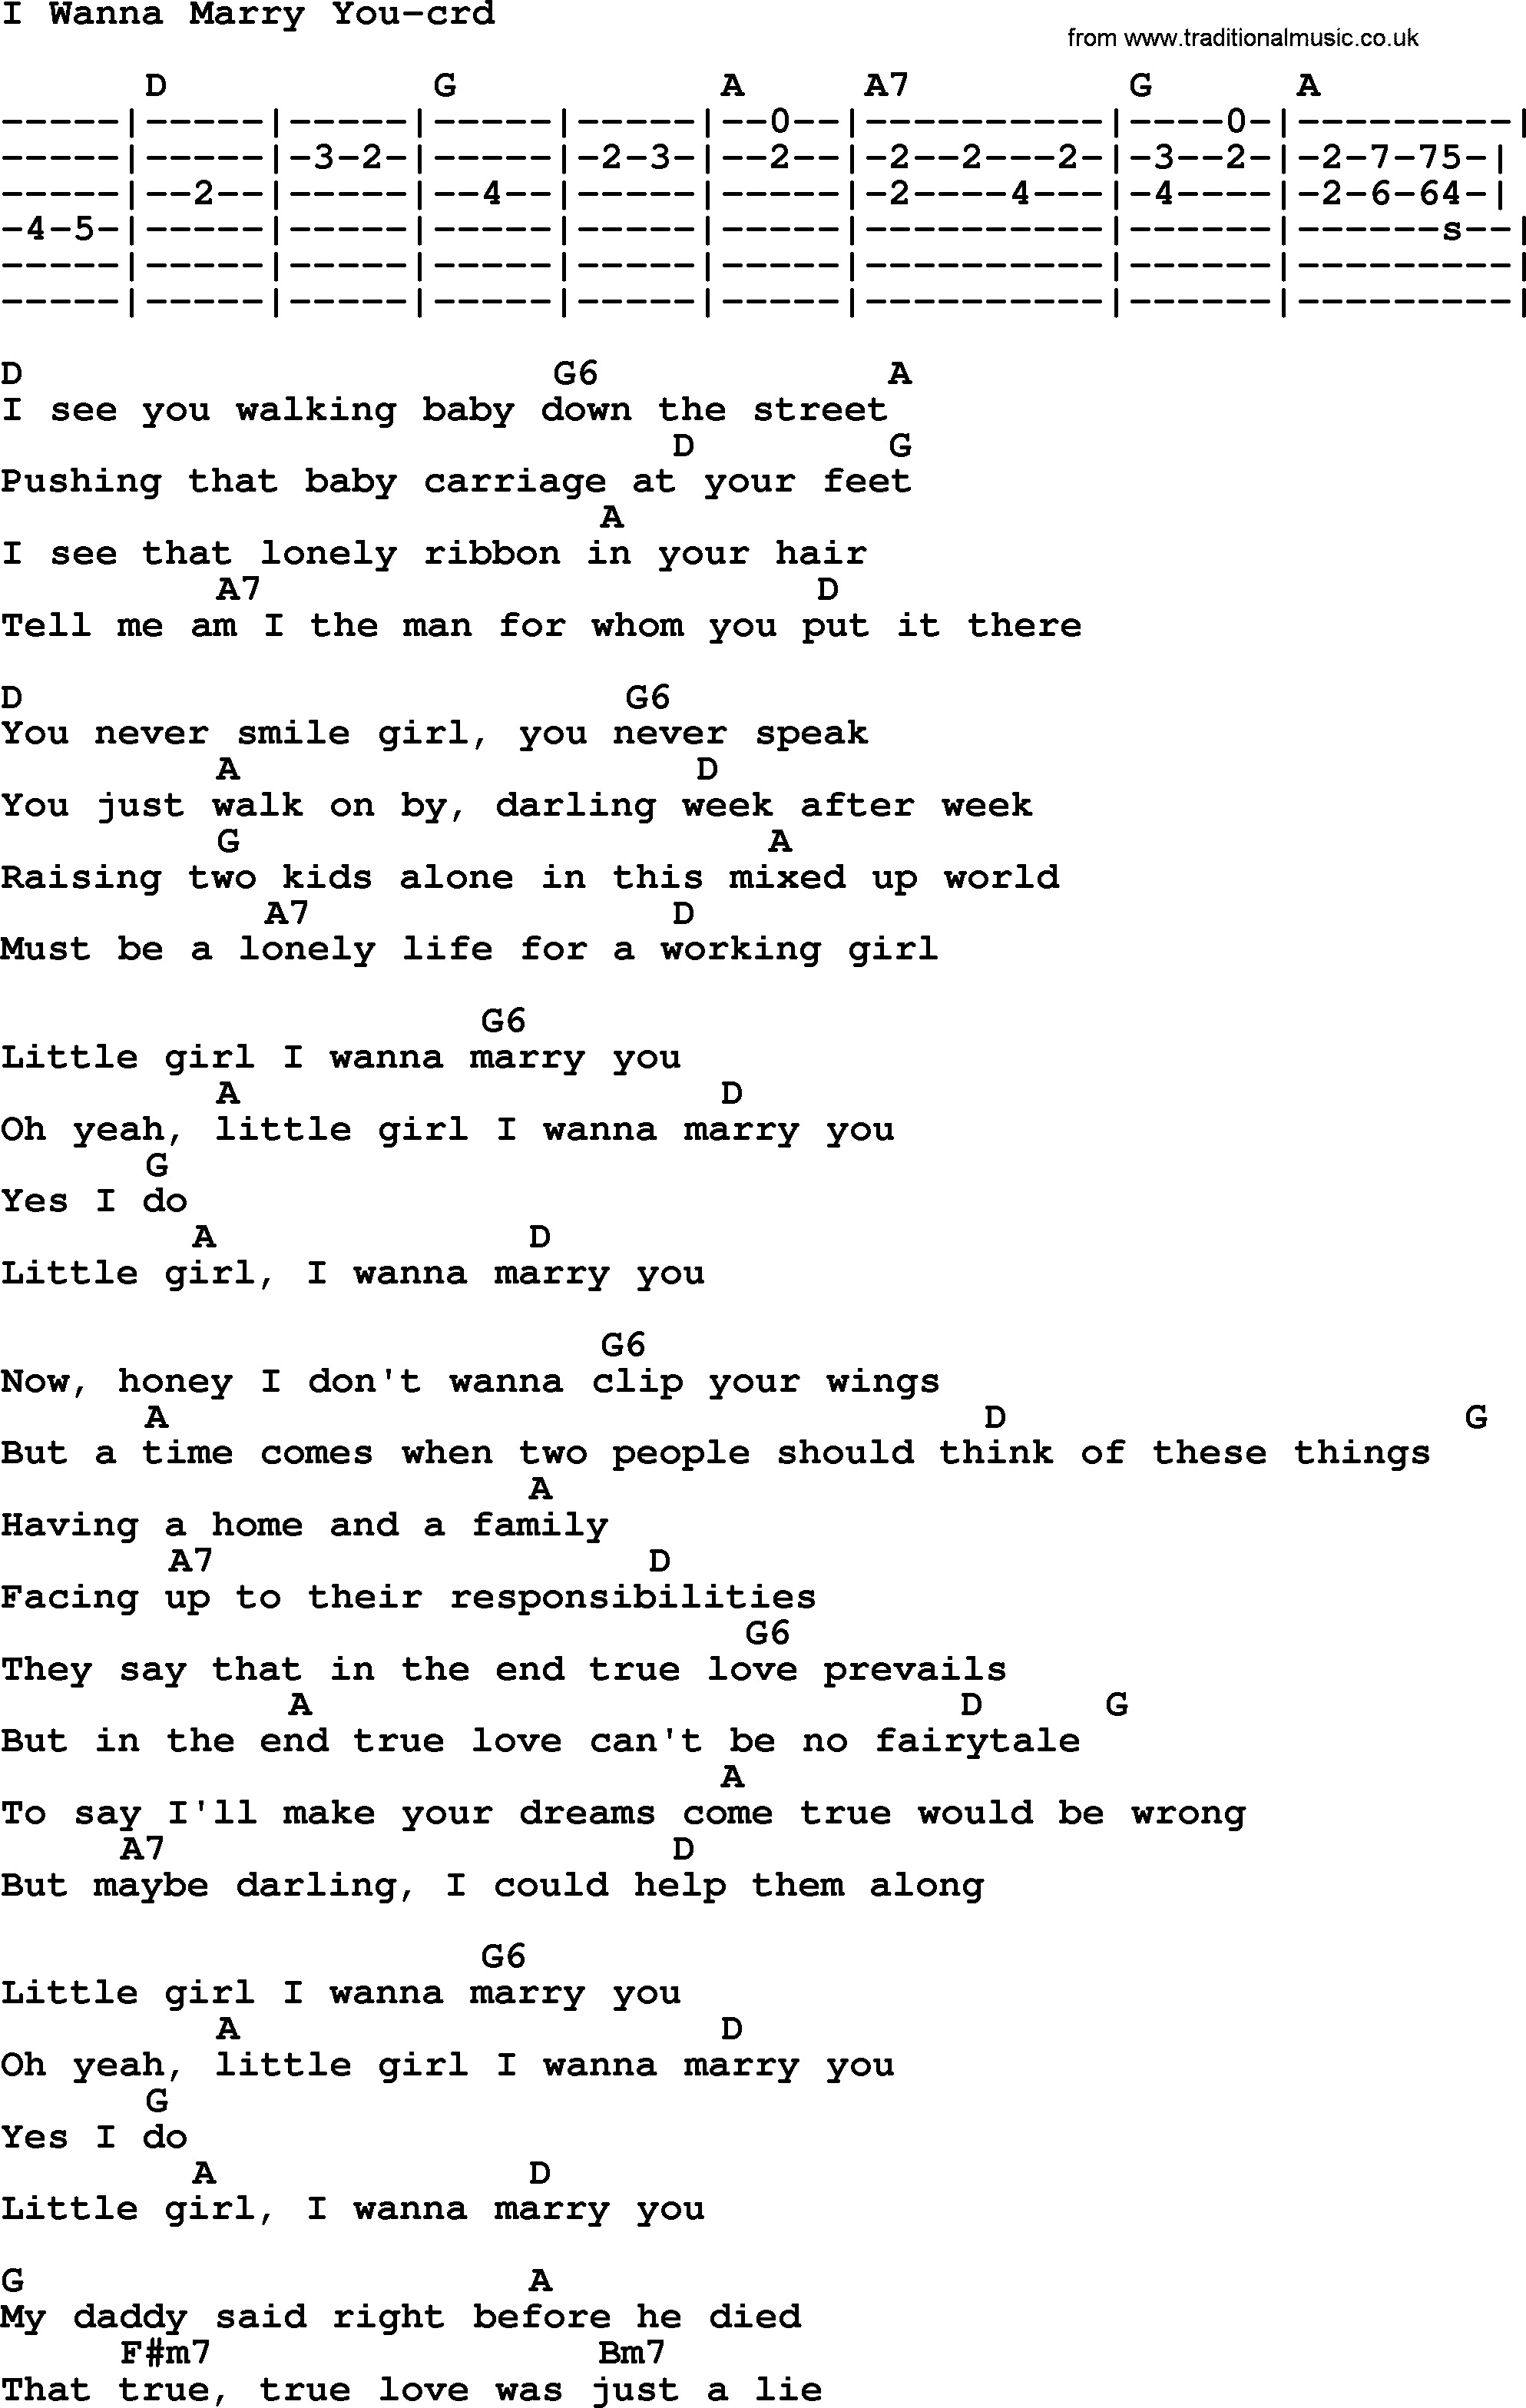 Bruce Springsteen song: I Wanna Marry You, lyrics and chords